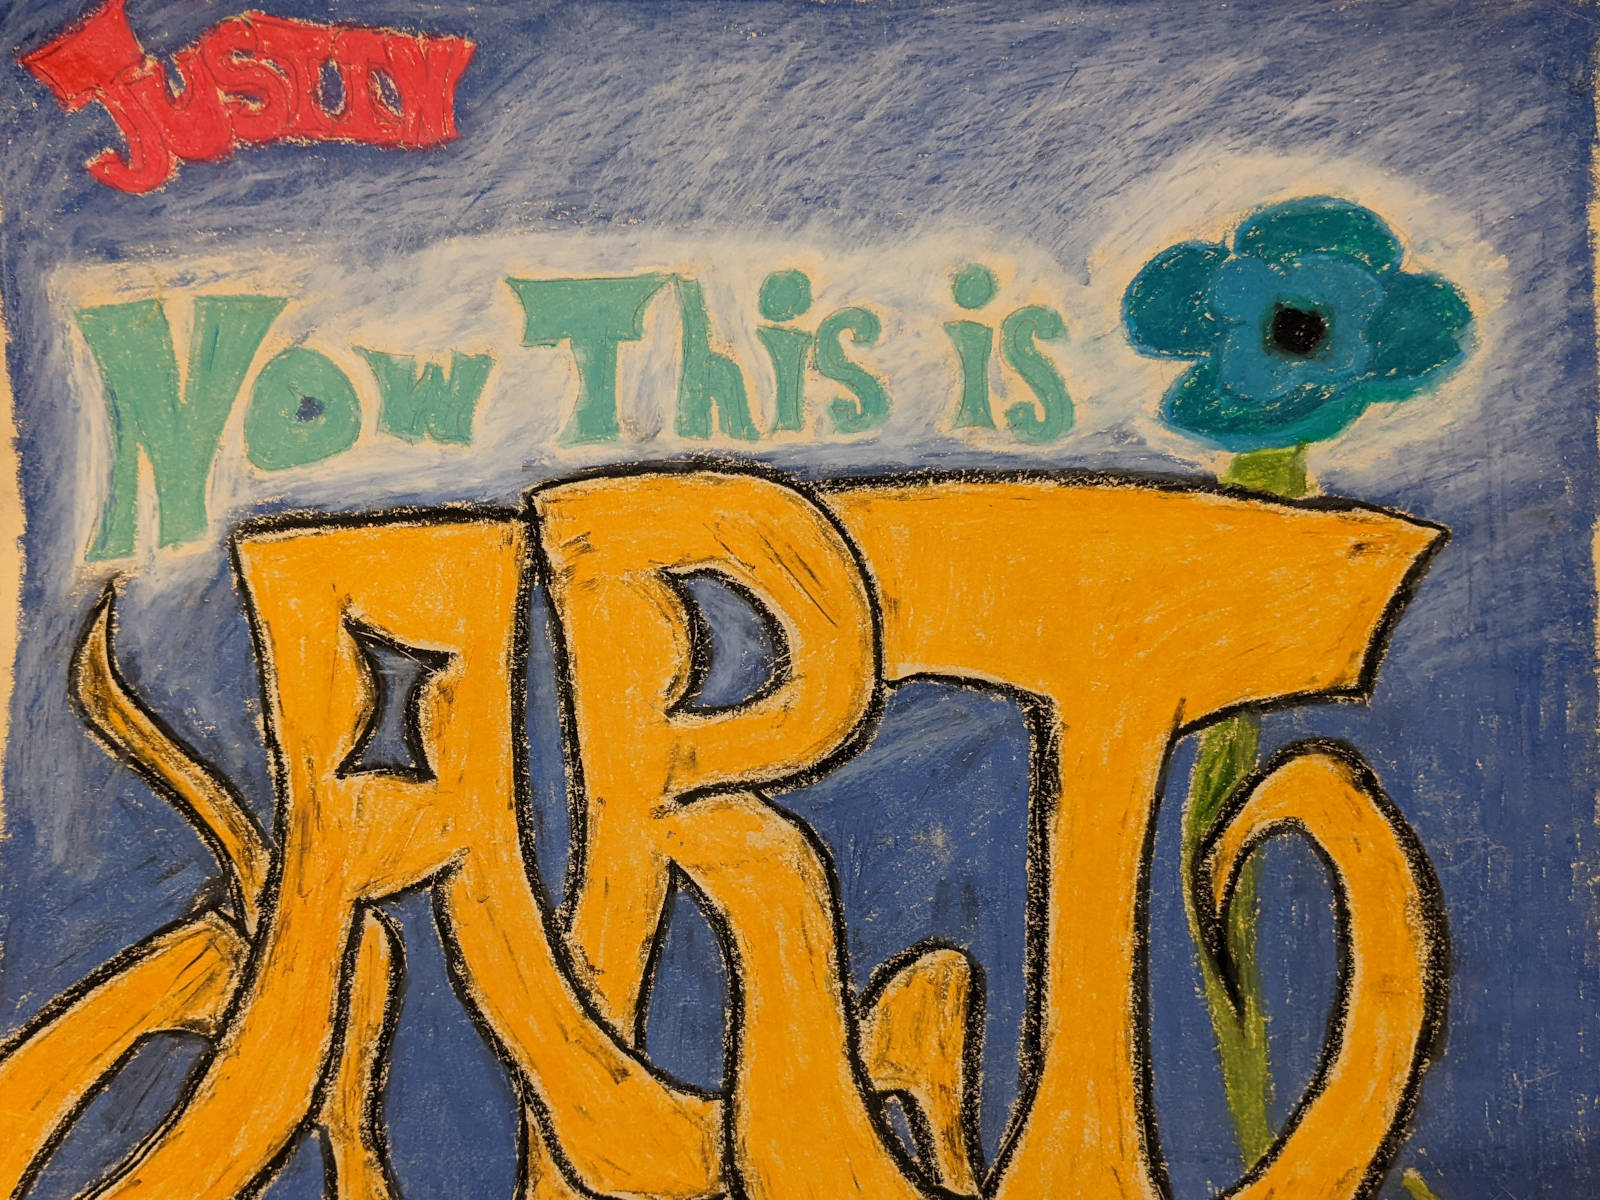 Colorful drawing with the name "Justin" at the top, followed by the phrase "Now This Is Art."